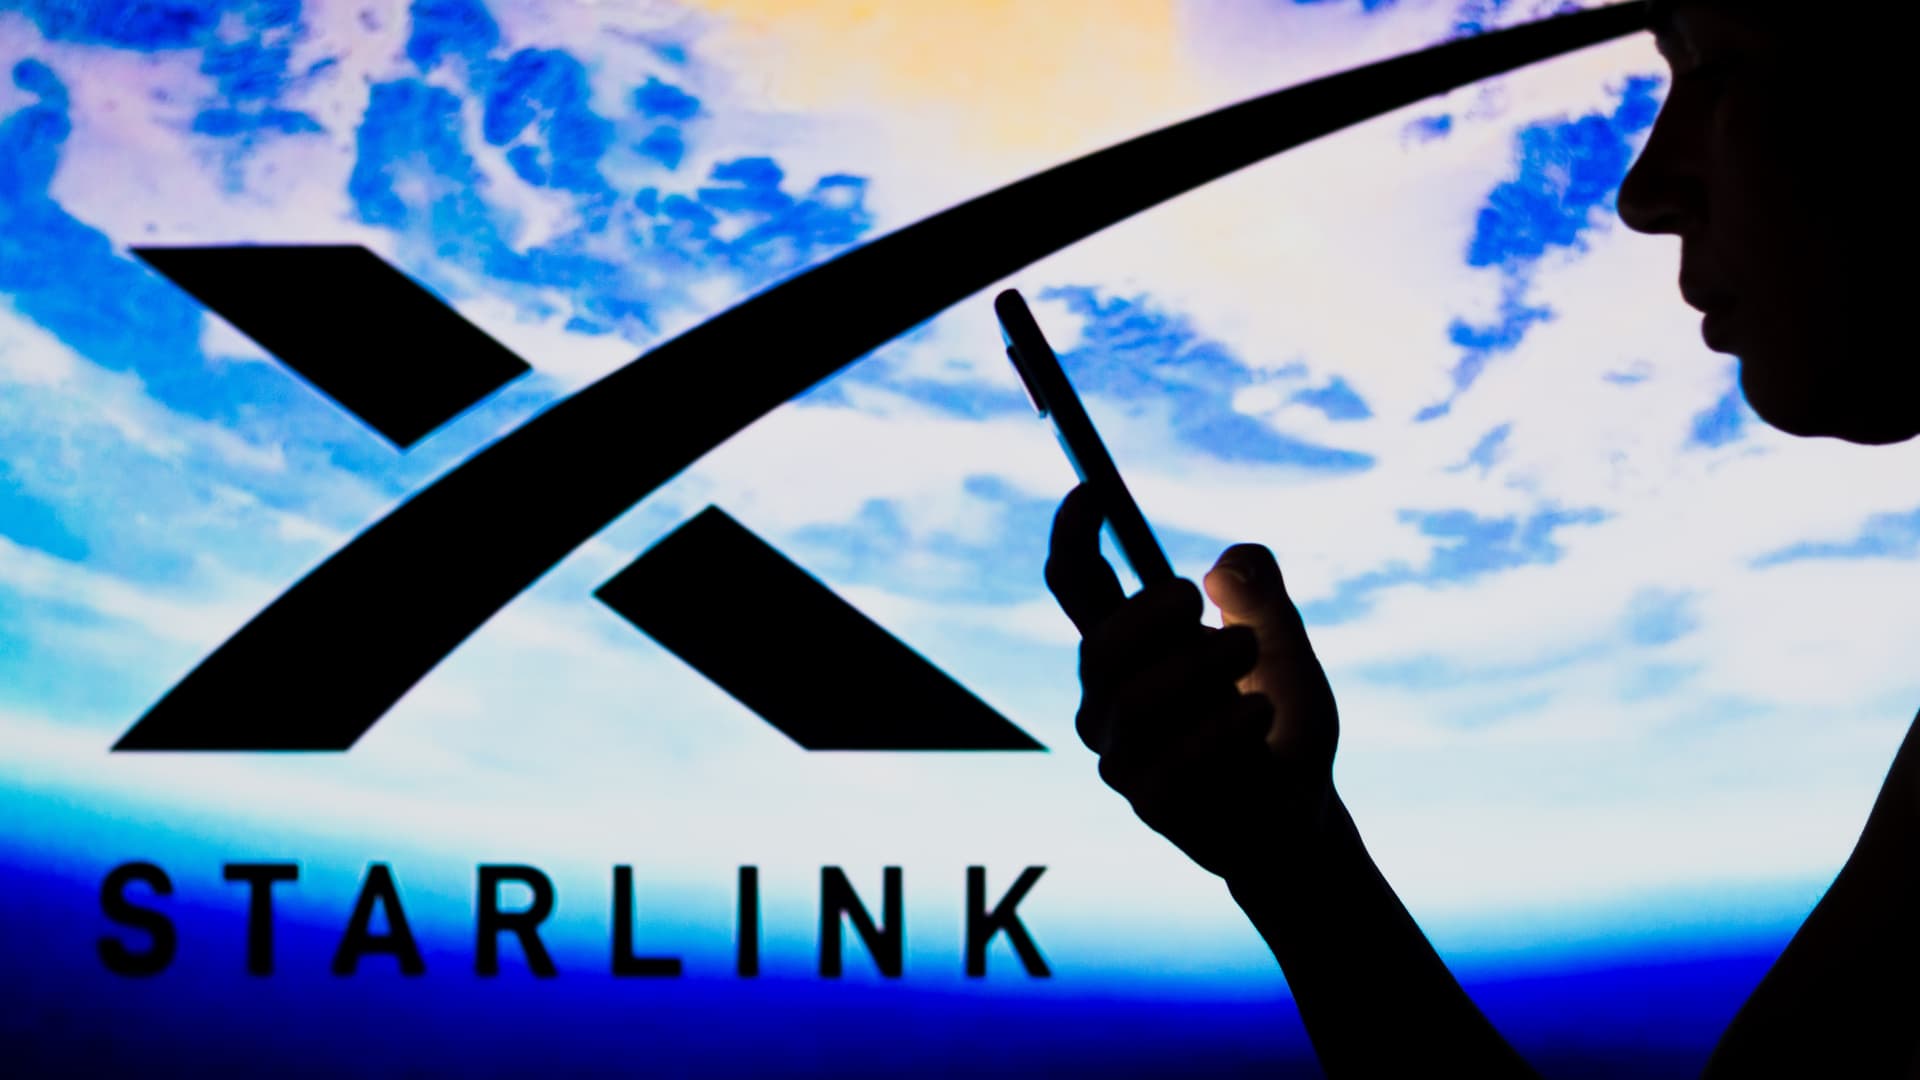 FCC authorizes SpaceX to provide mobile Starlink internet service to boats, planes and trucks